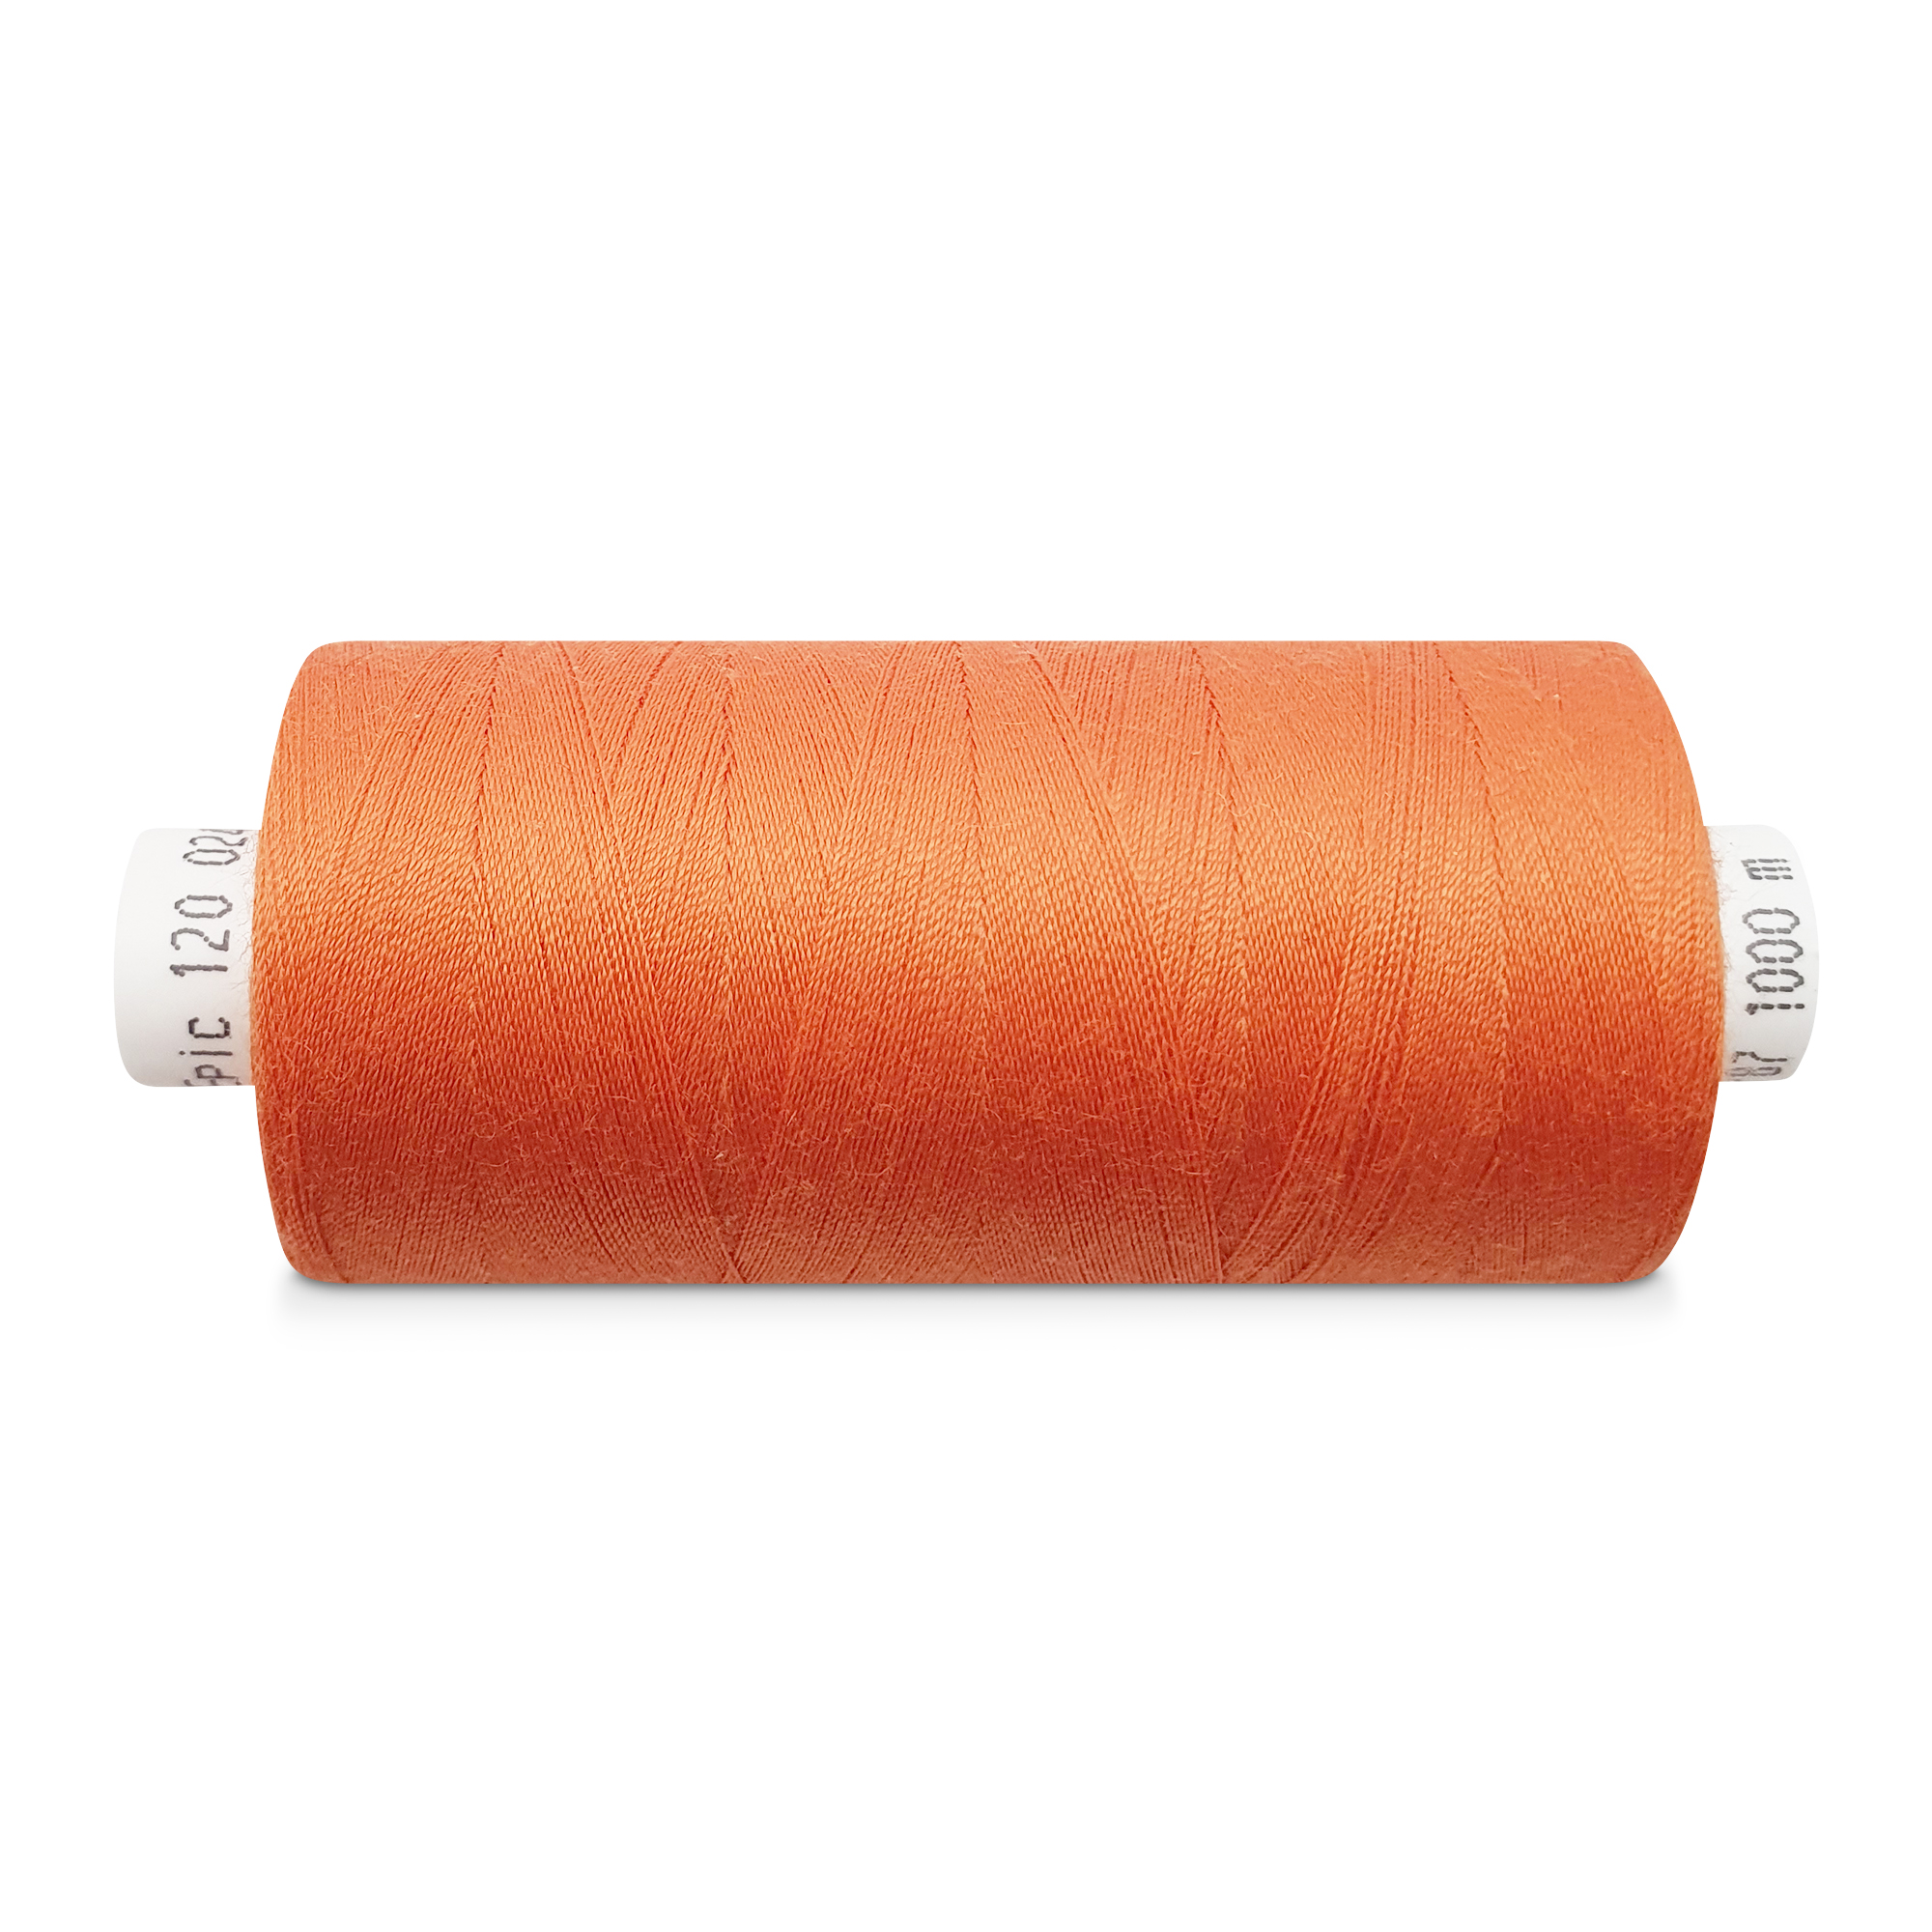 Sewing thread pyracanth